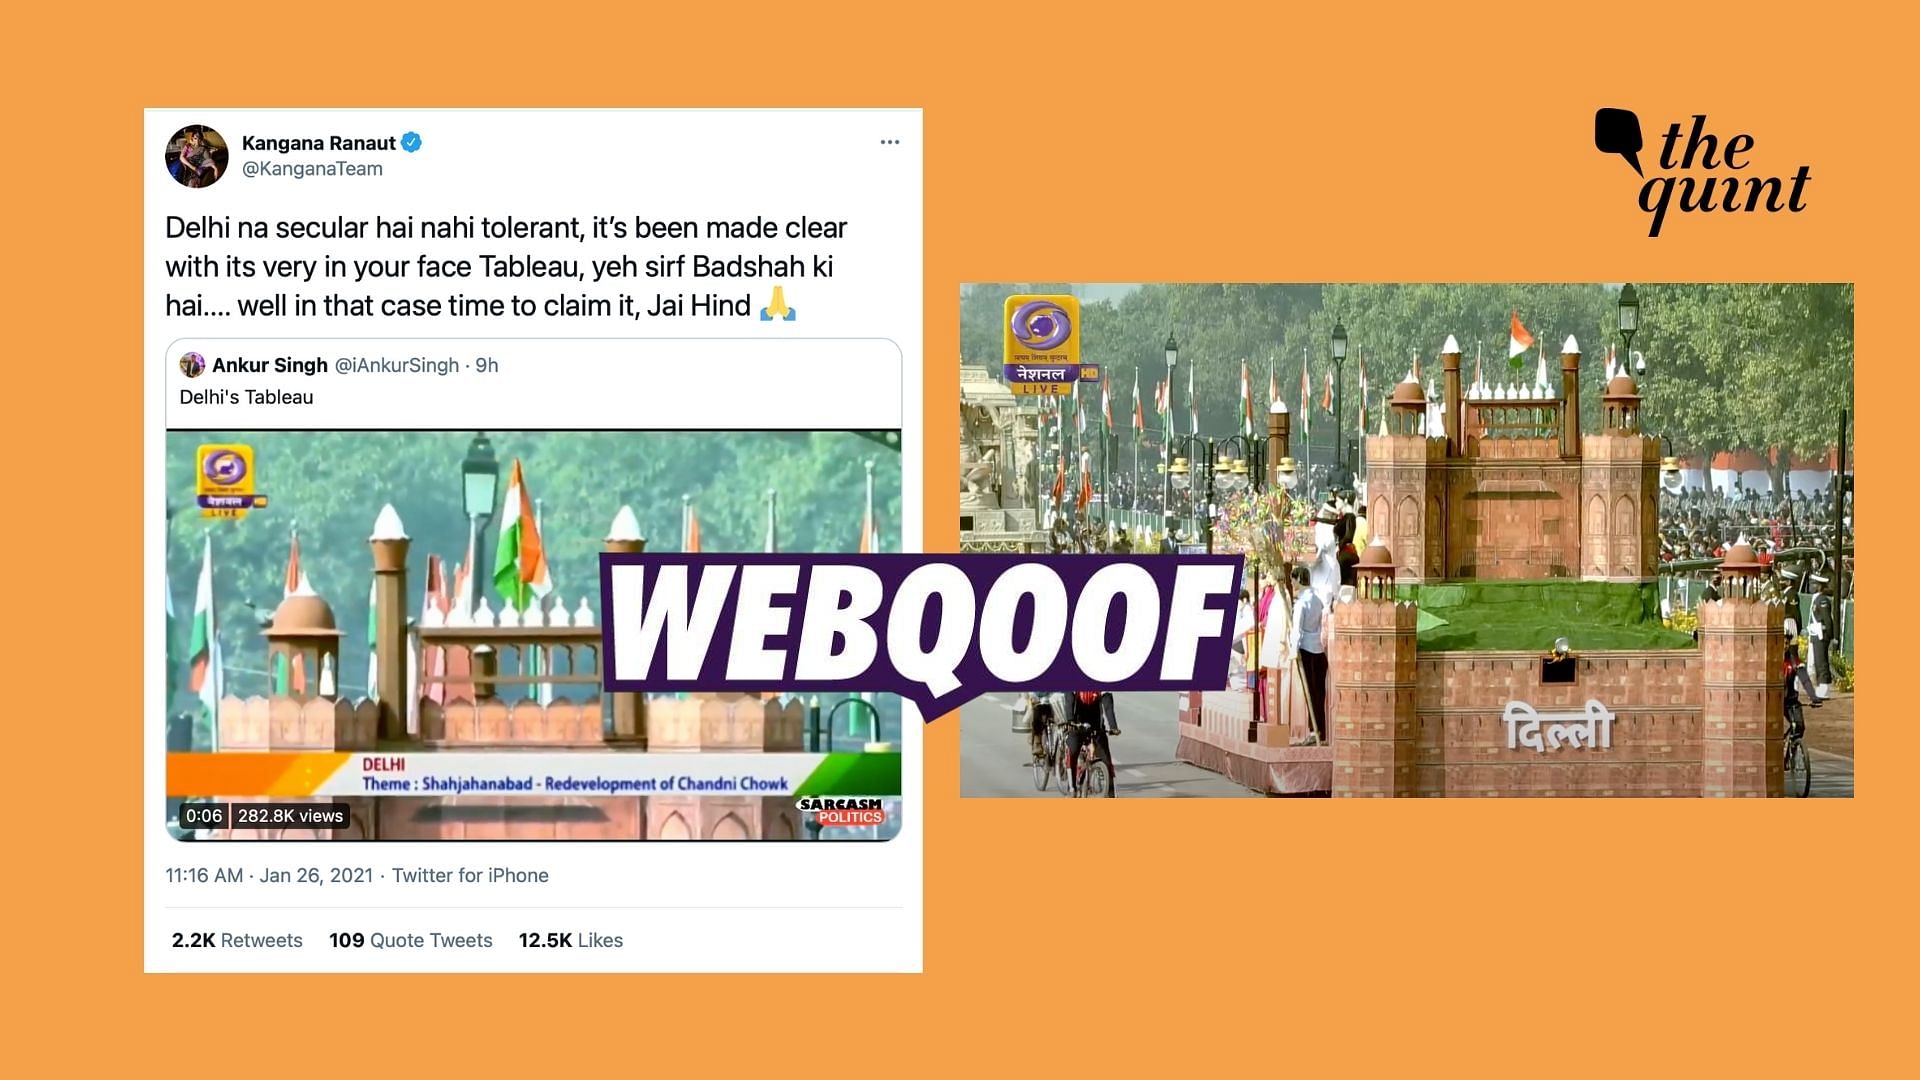 A clipped video of the Delhi tableau at this year’s Republic Day parade was shared to make a false claim.